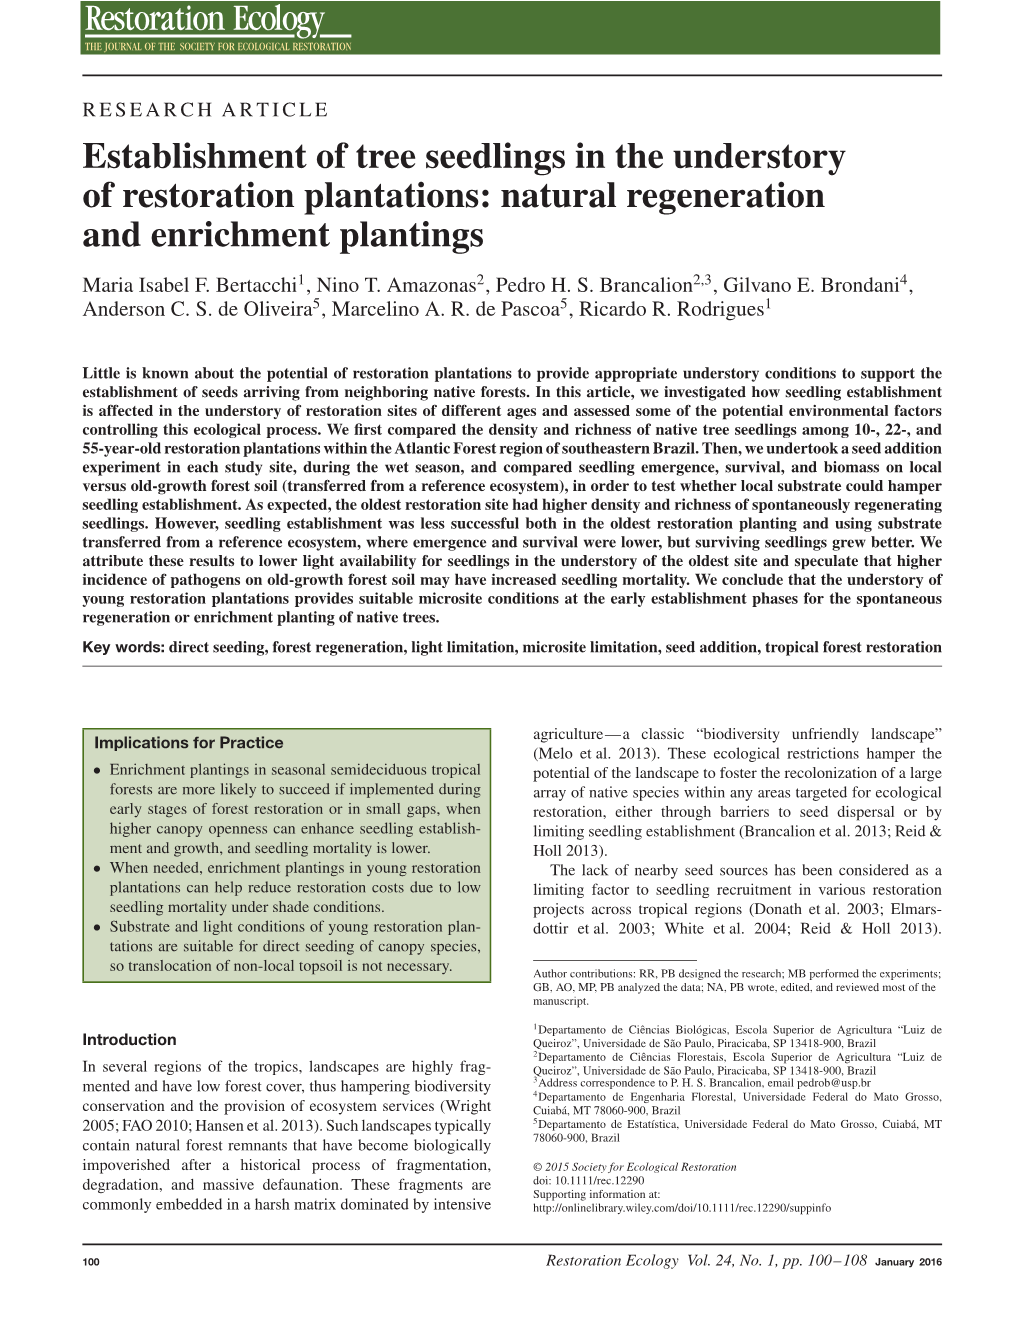 Establishment of Tree Seedlings in the Understory of Restoration Plantations: Natural Regeneration and Enrichment Plantings Maria Isabel F